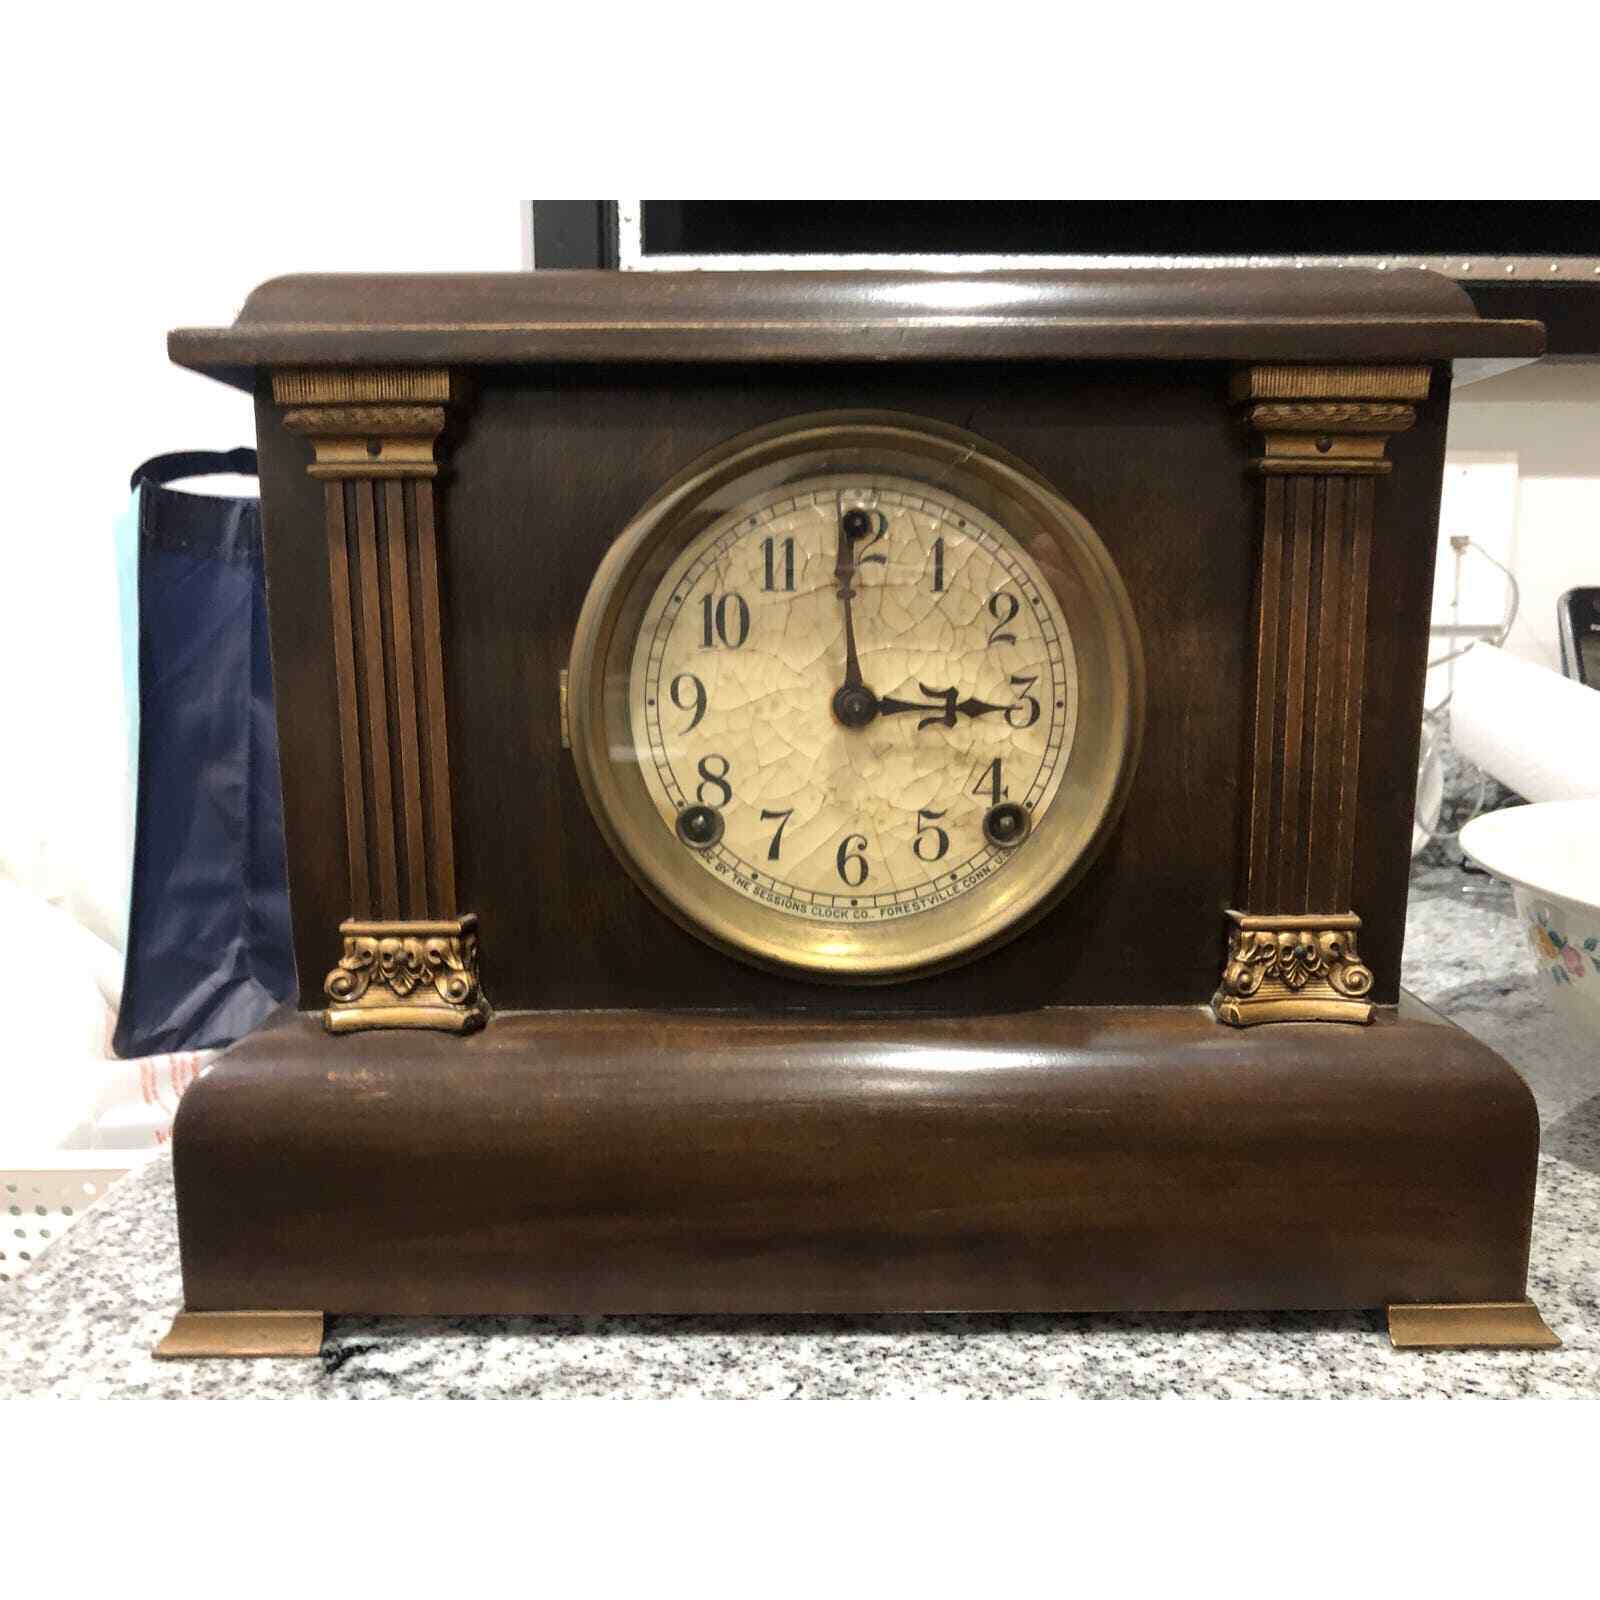 Antique Mantel Clock by Sessions Clock Co. Forestdale Conn.